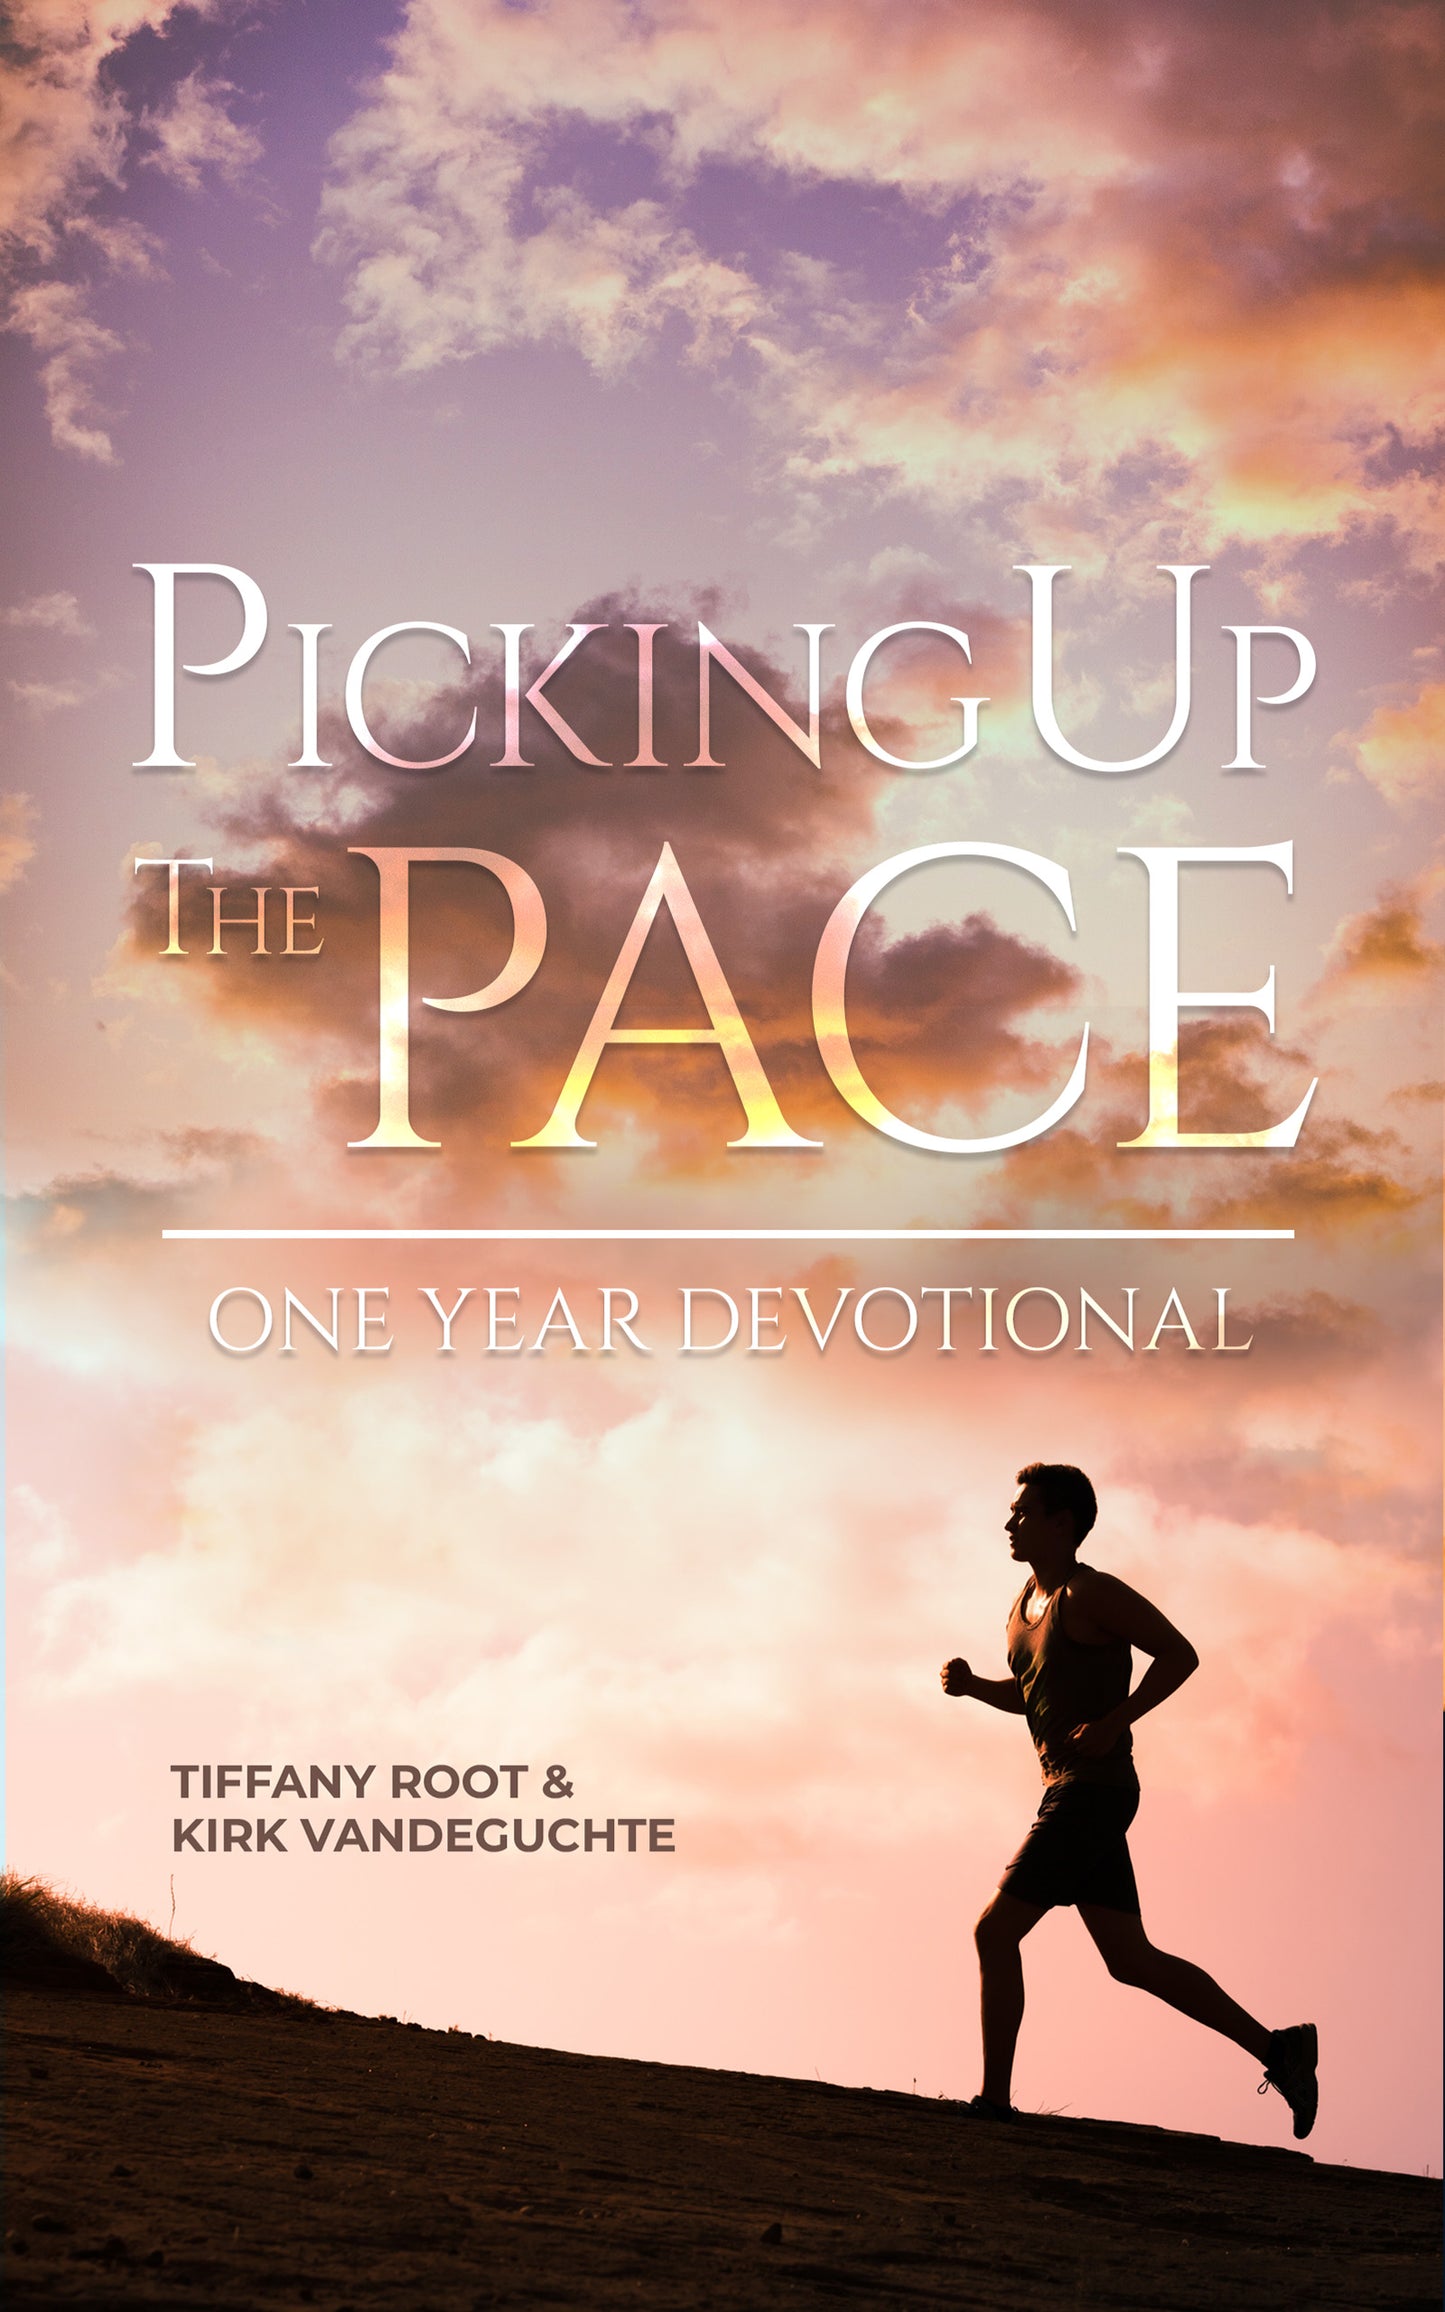 Picking Up the Pace One Year Devotional - Tiffany Root & Kirk VanDeguchte